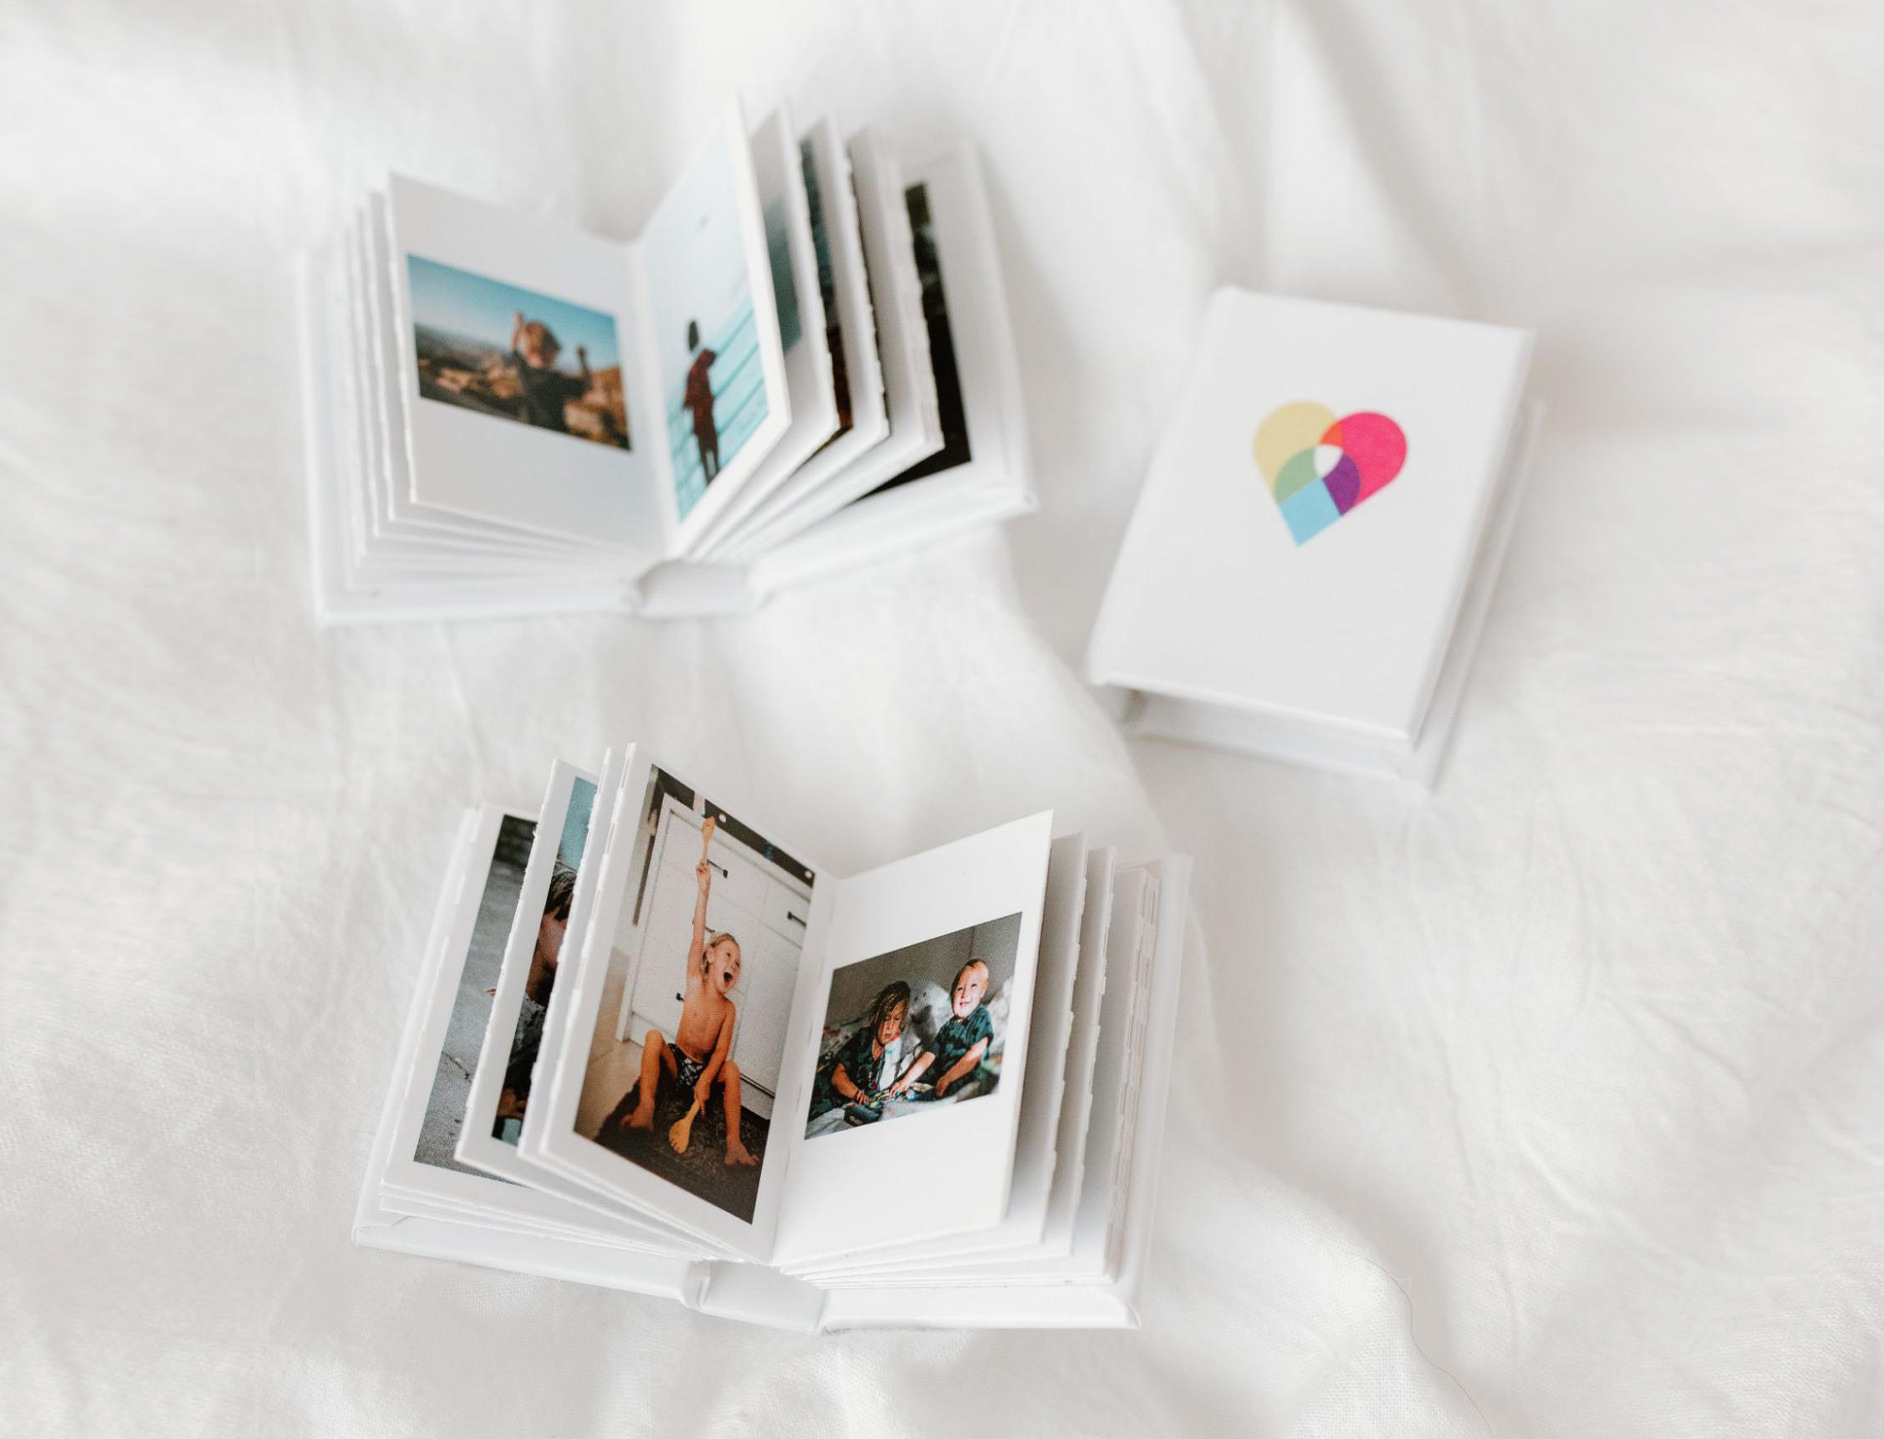 Tiny Books, Print up to 72 of your Instagram or desktop photos in our  bestselling miniature photo books.